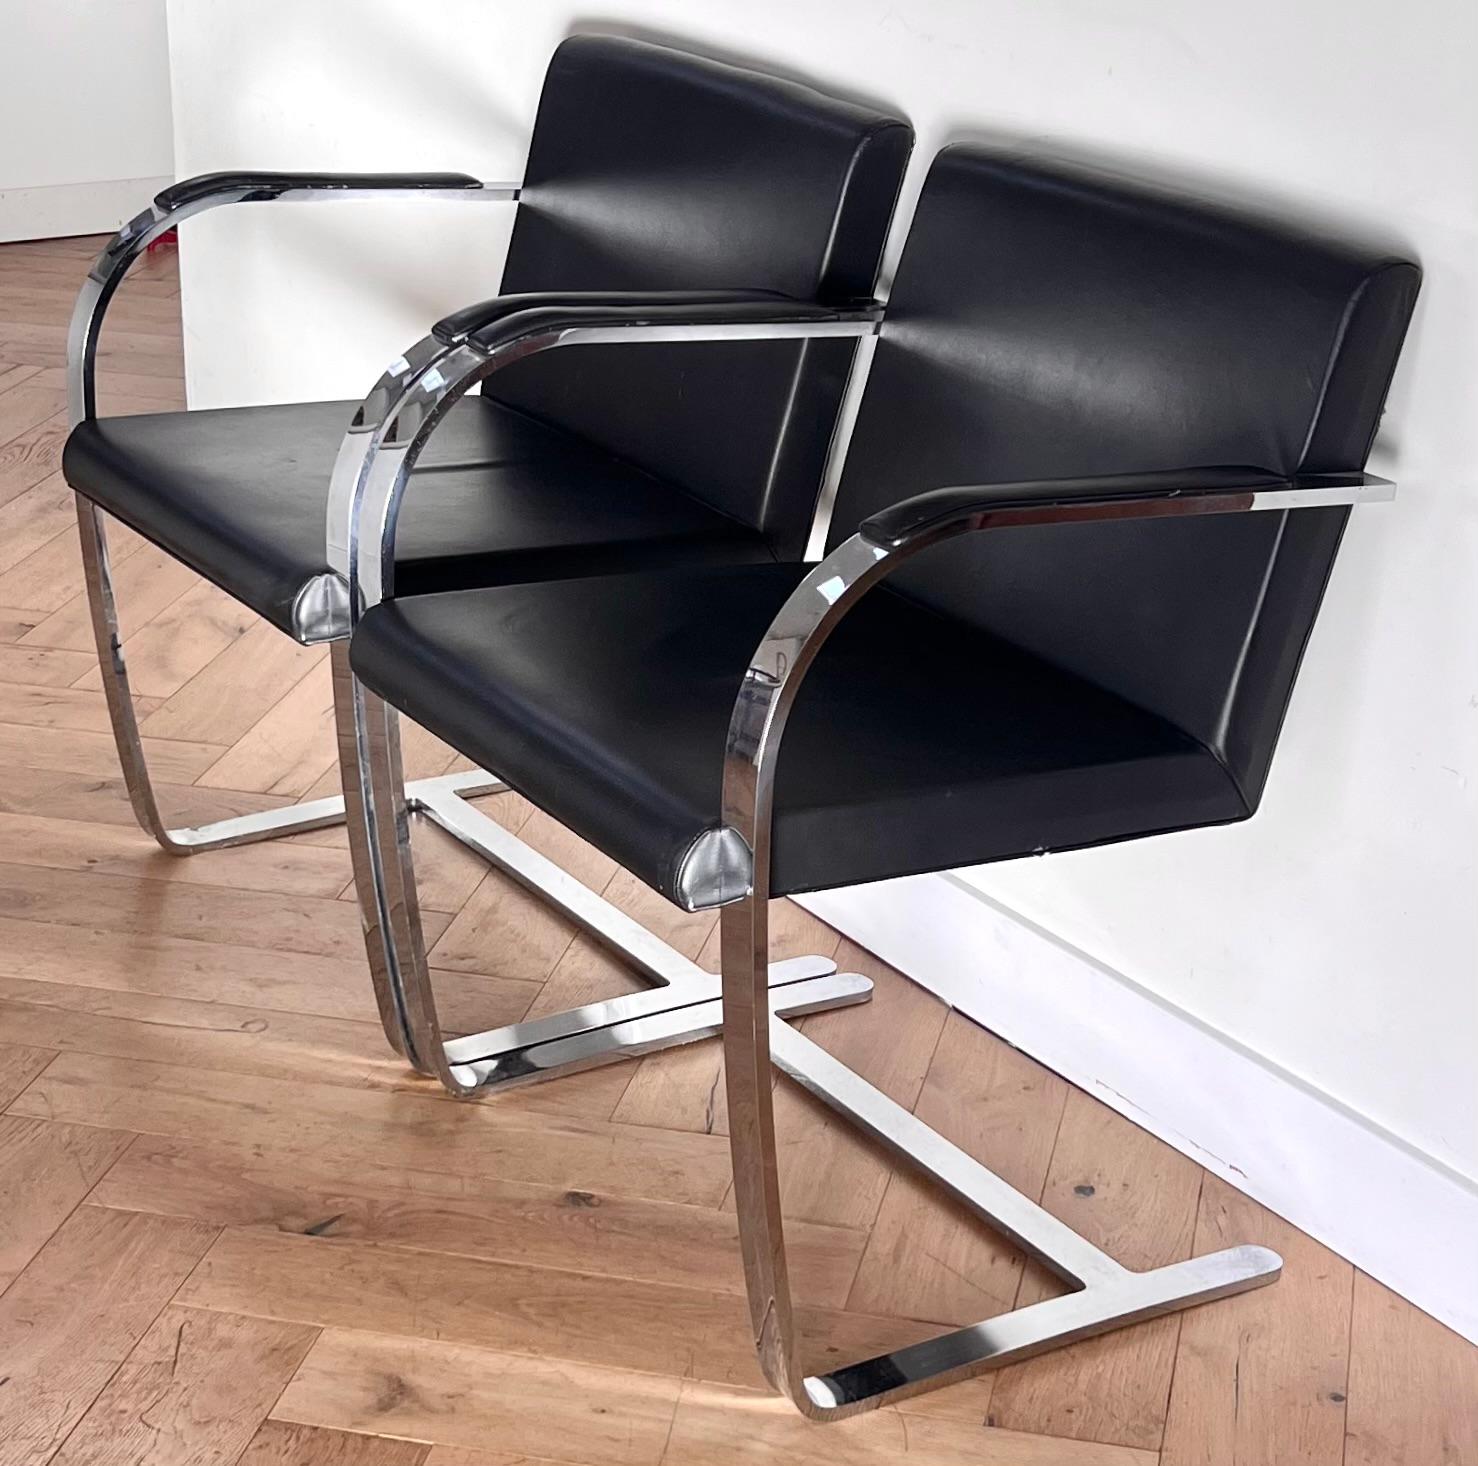 Pair of Mies van der Rohe Brno chairs by Palazzetti, 1970s For Sale 12